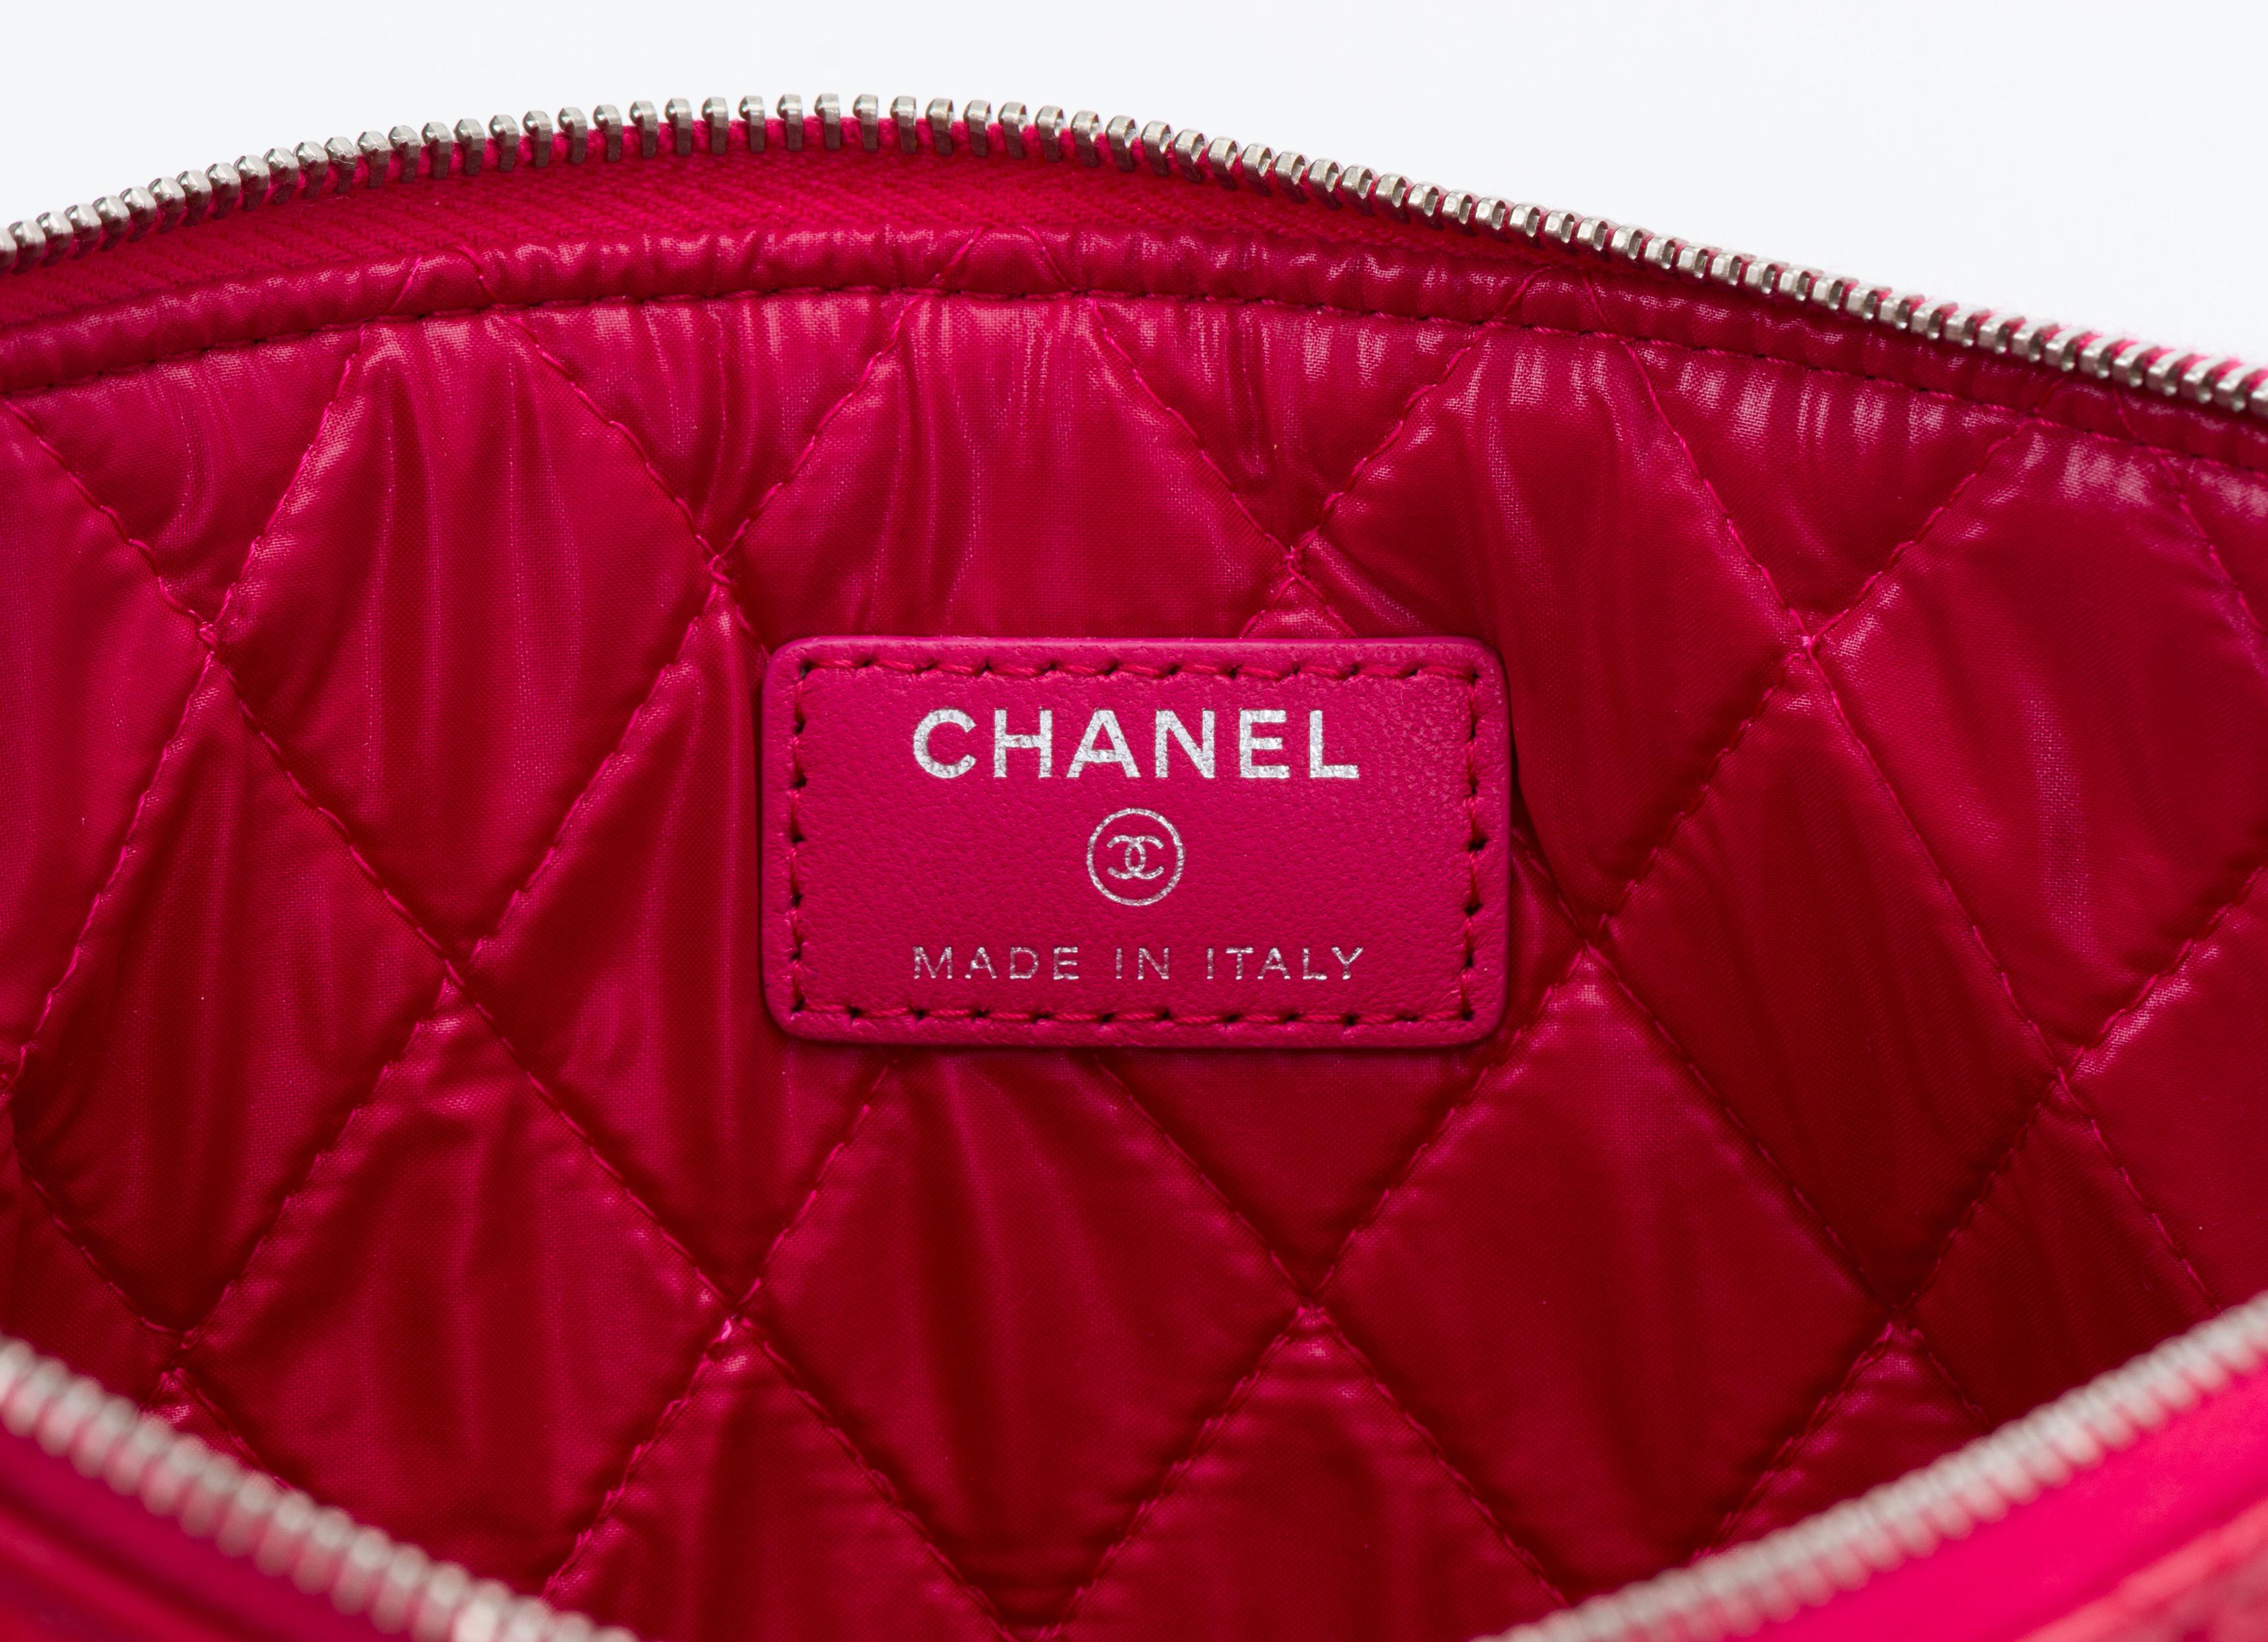 Women's Chanel Hot Pink Patent Leather Clutch Bag